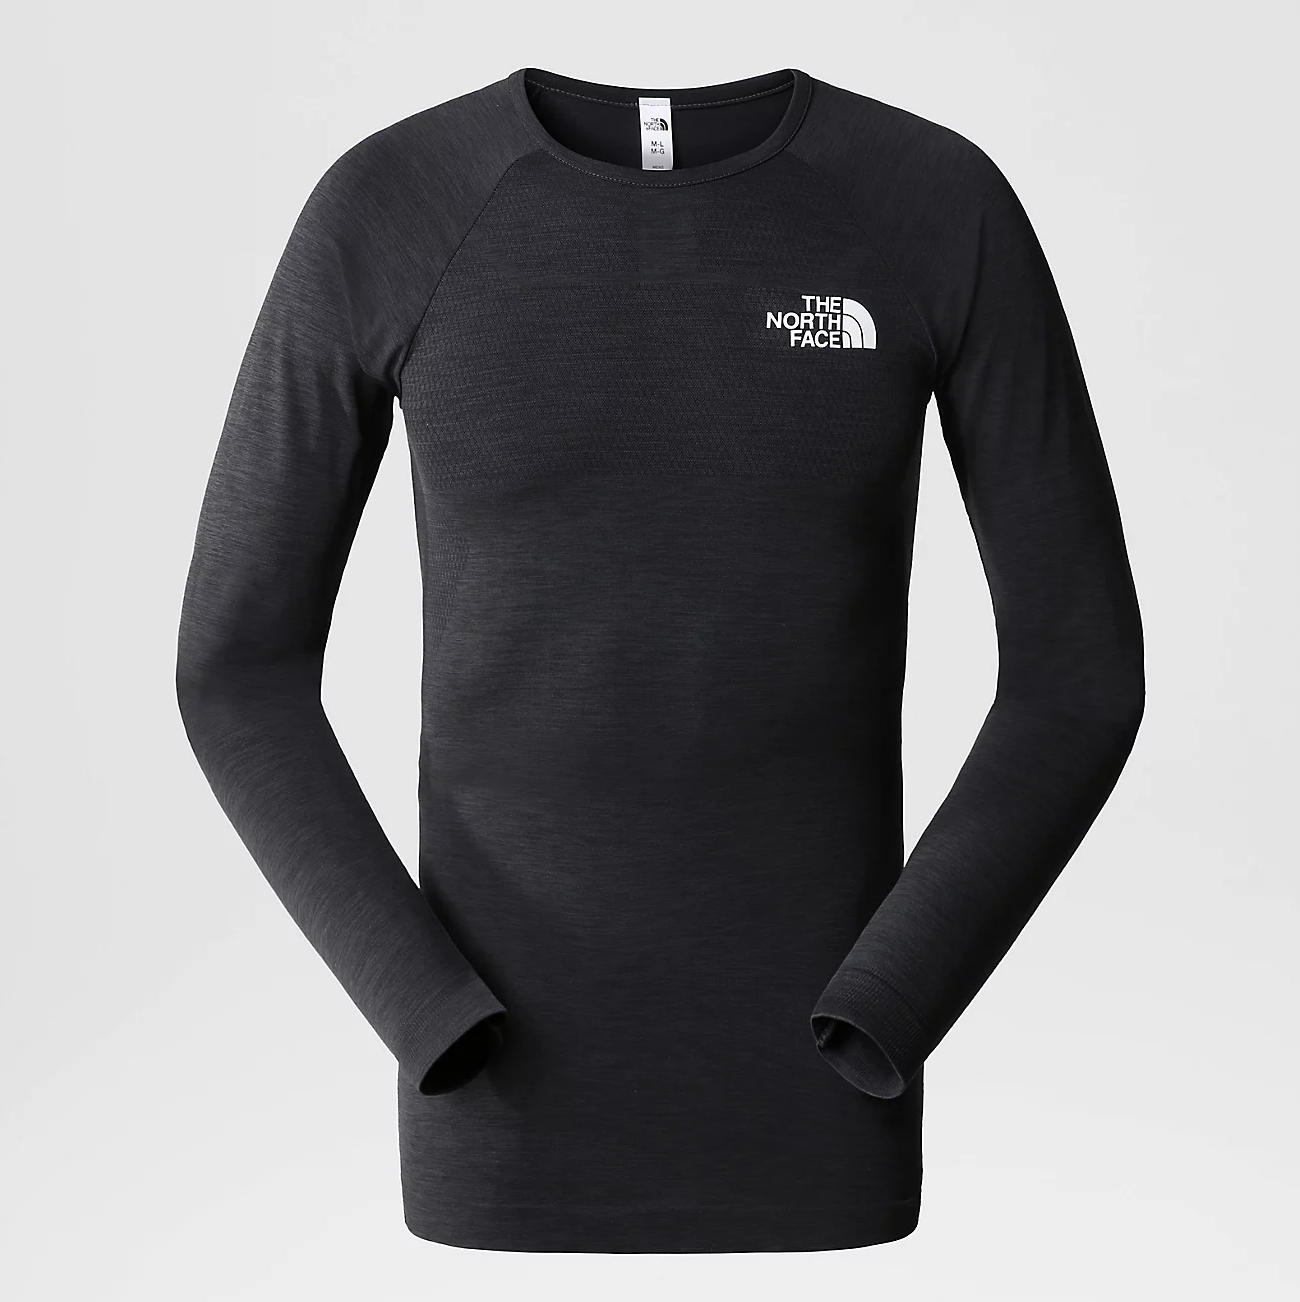 The North Face Lab Langarm-Top